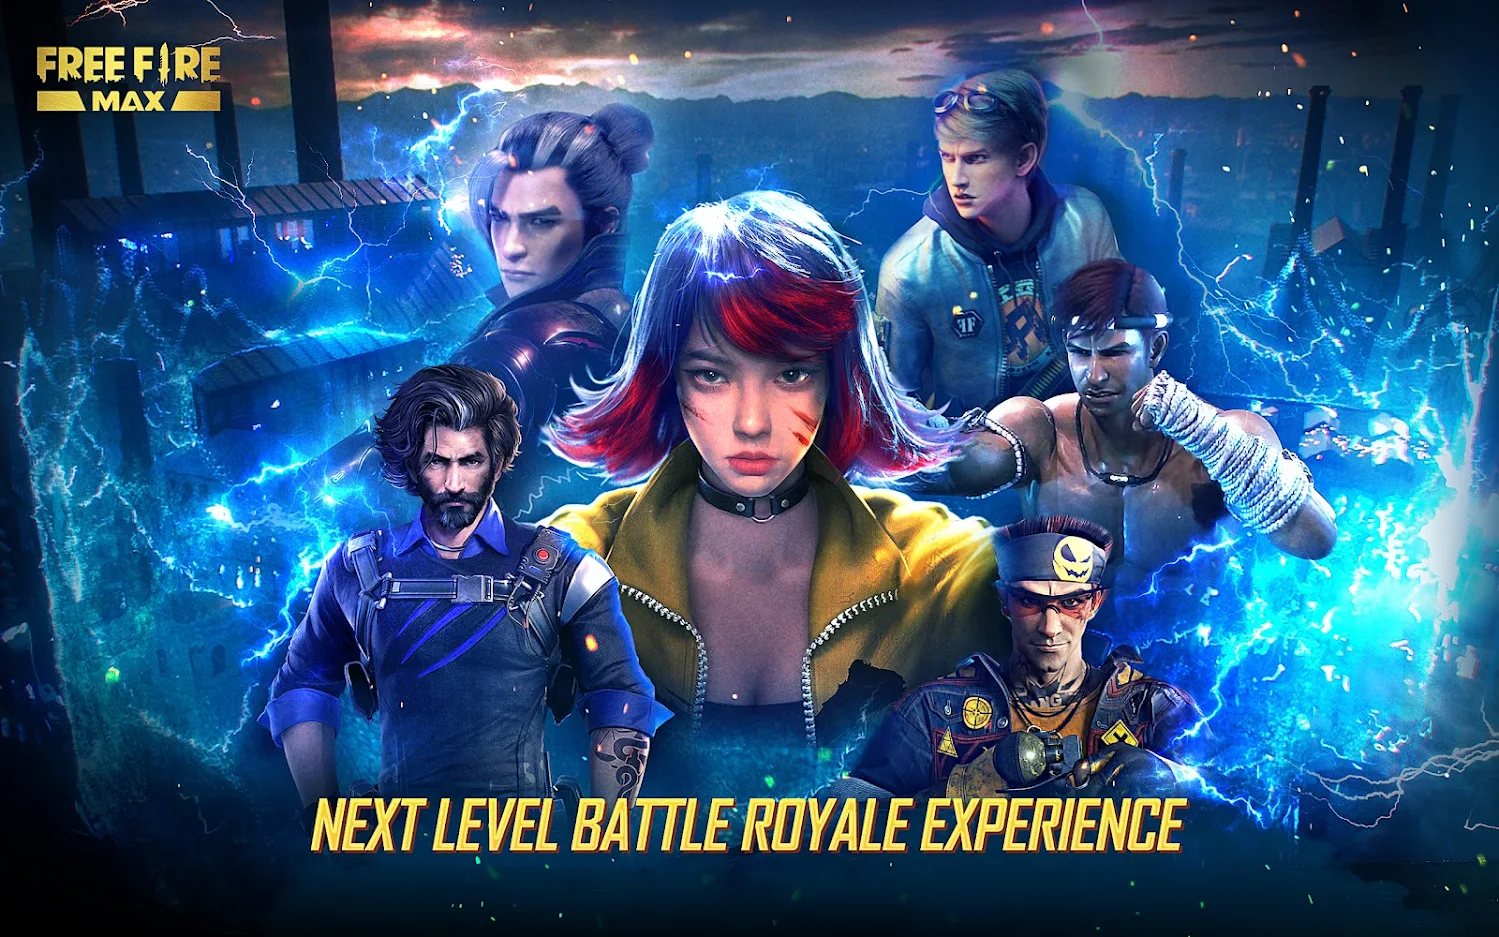 Download & Play Free Fire MAX on PC & Mac with NoxPlayer (Emulator)